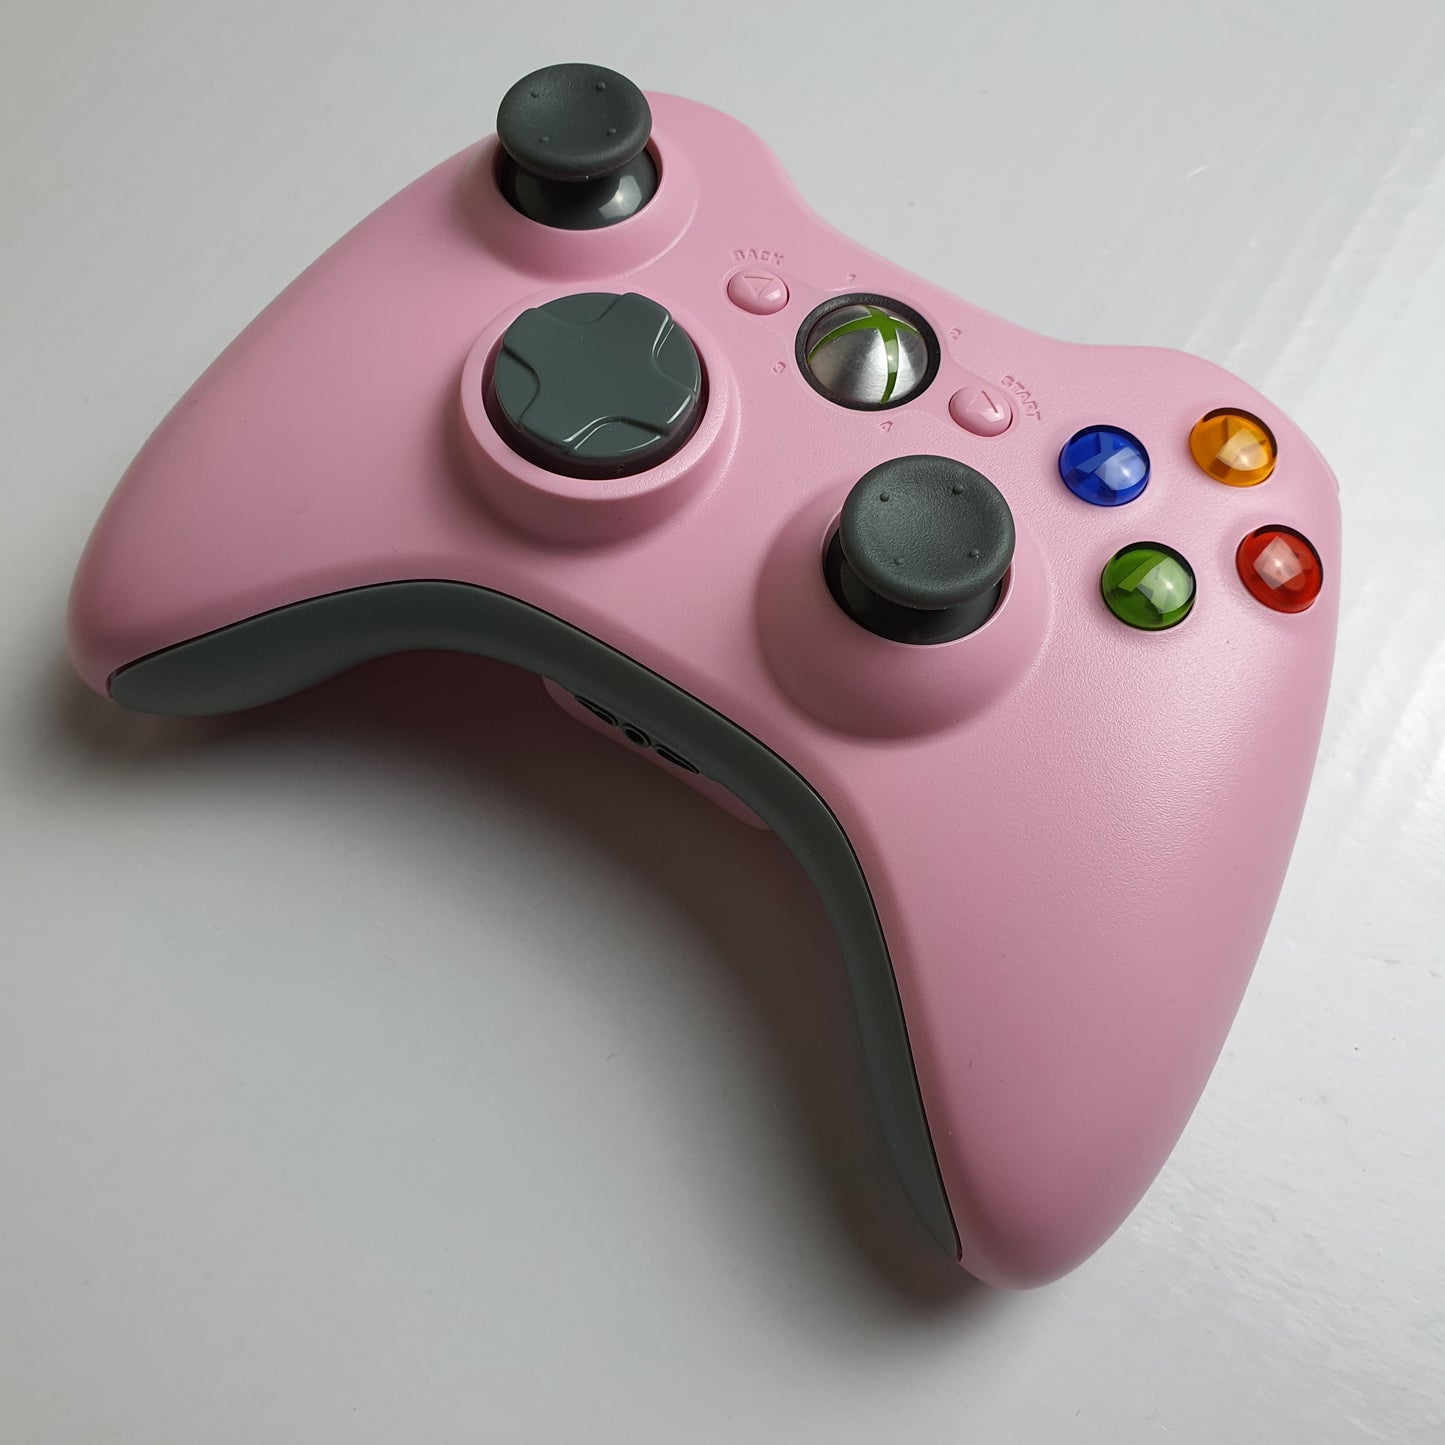 Official Microsoft Xbox 360 Wireless Pink Controller